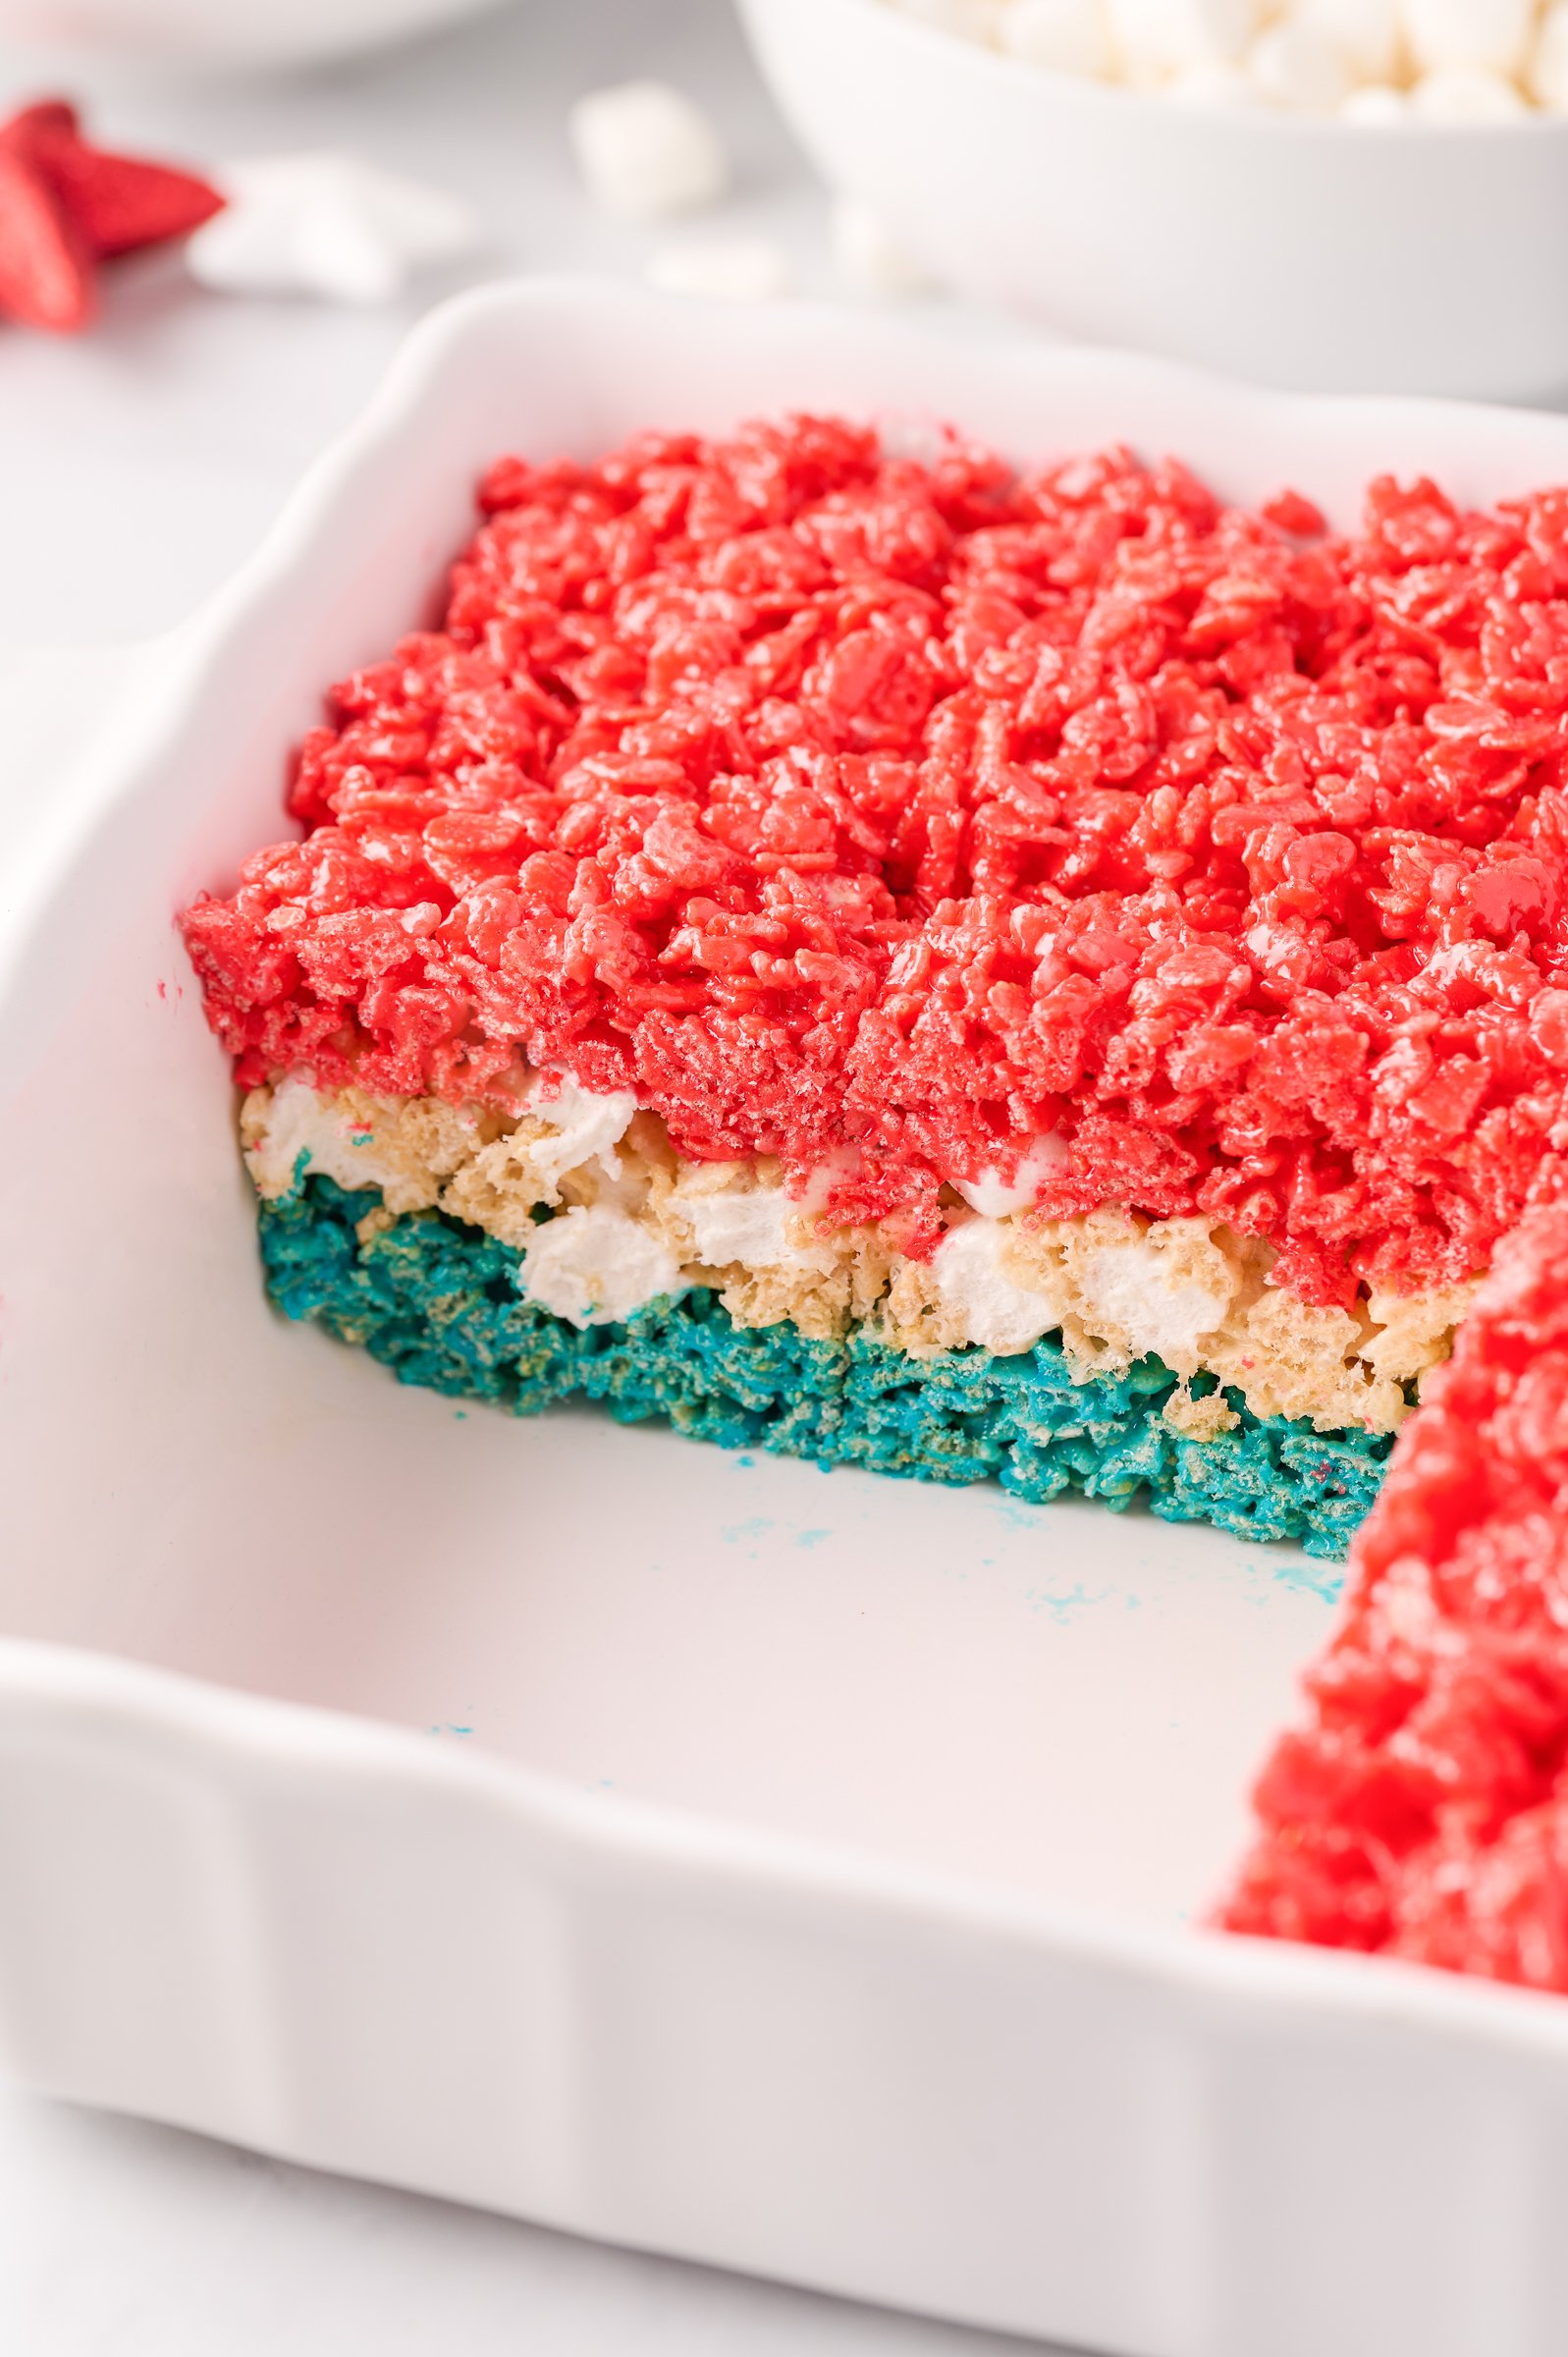 rice krispie treats in a baking dish with a corner of treats removed to reveal the red, white and blue layers of the rice krispie treats